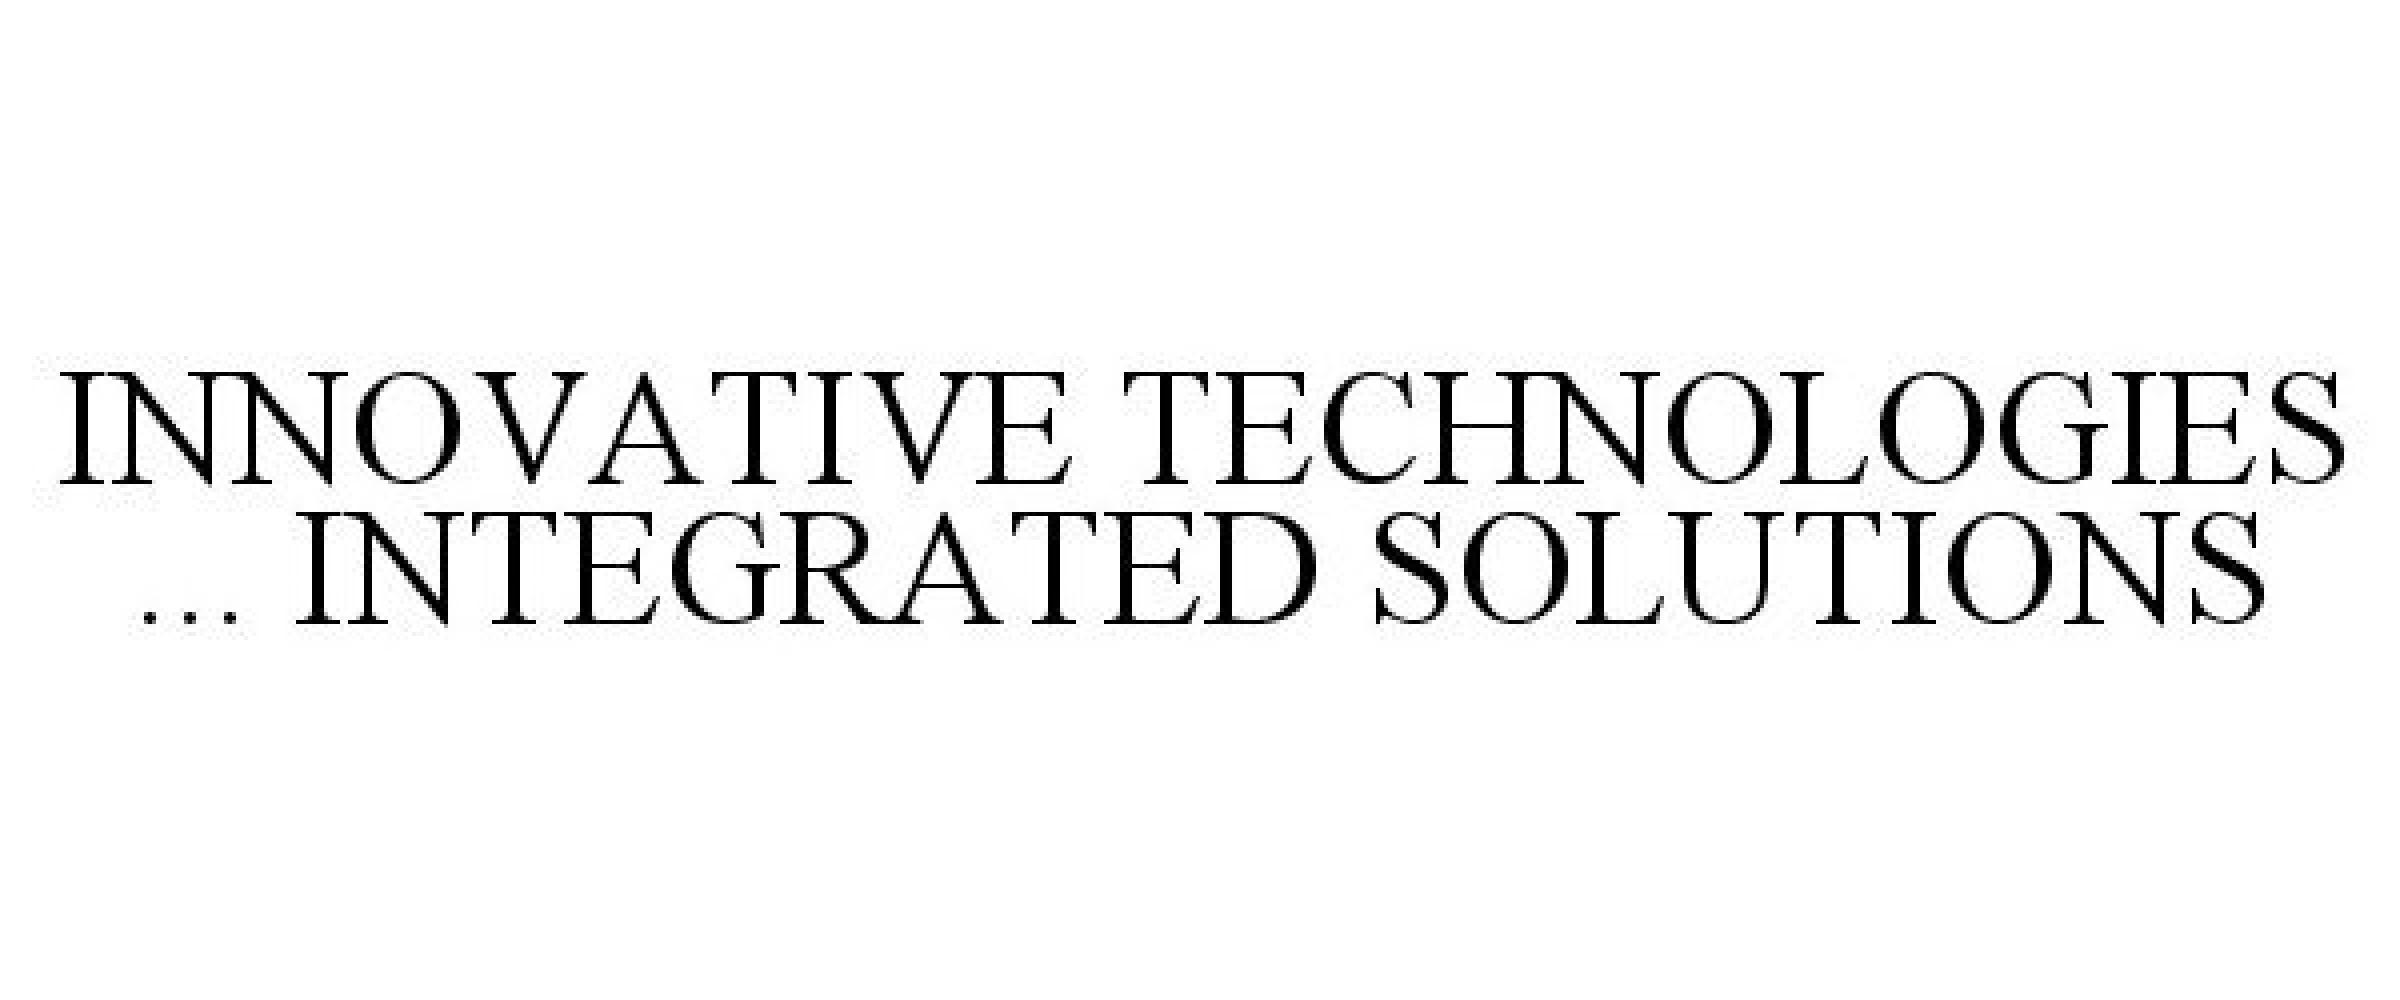  INNOVATIVE TECHNOLOGIES ... INTEGRATED SOLUTIONS